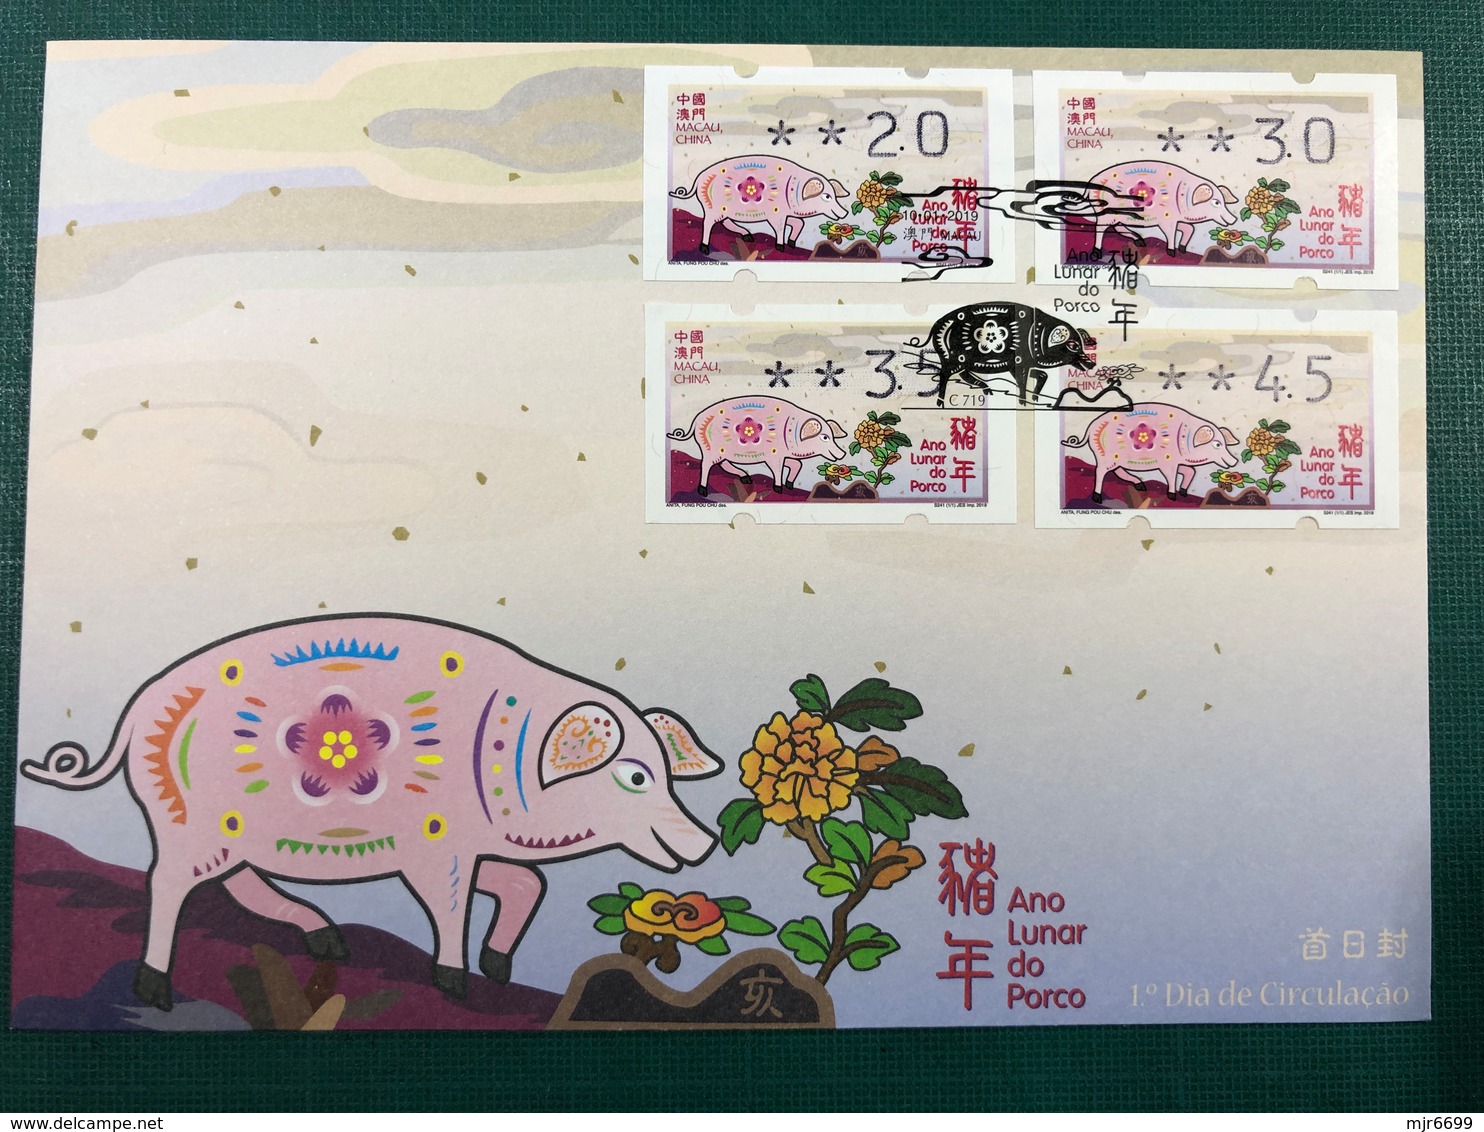 MACAU, 2019 ATM LABELS CHINESE ZODIAC YEAR OF THE PIG FIRST DAY COVER - Automatenmarken